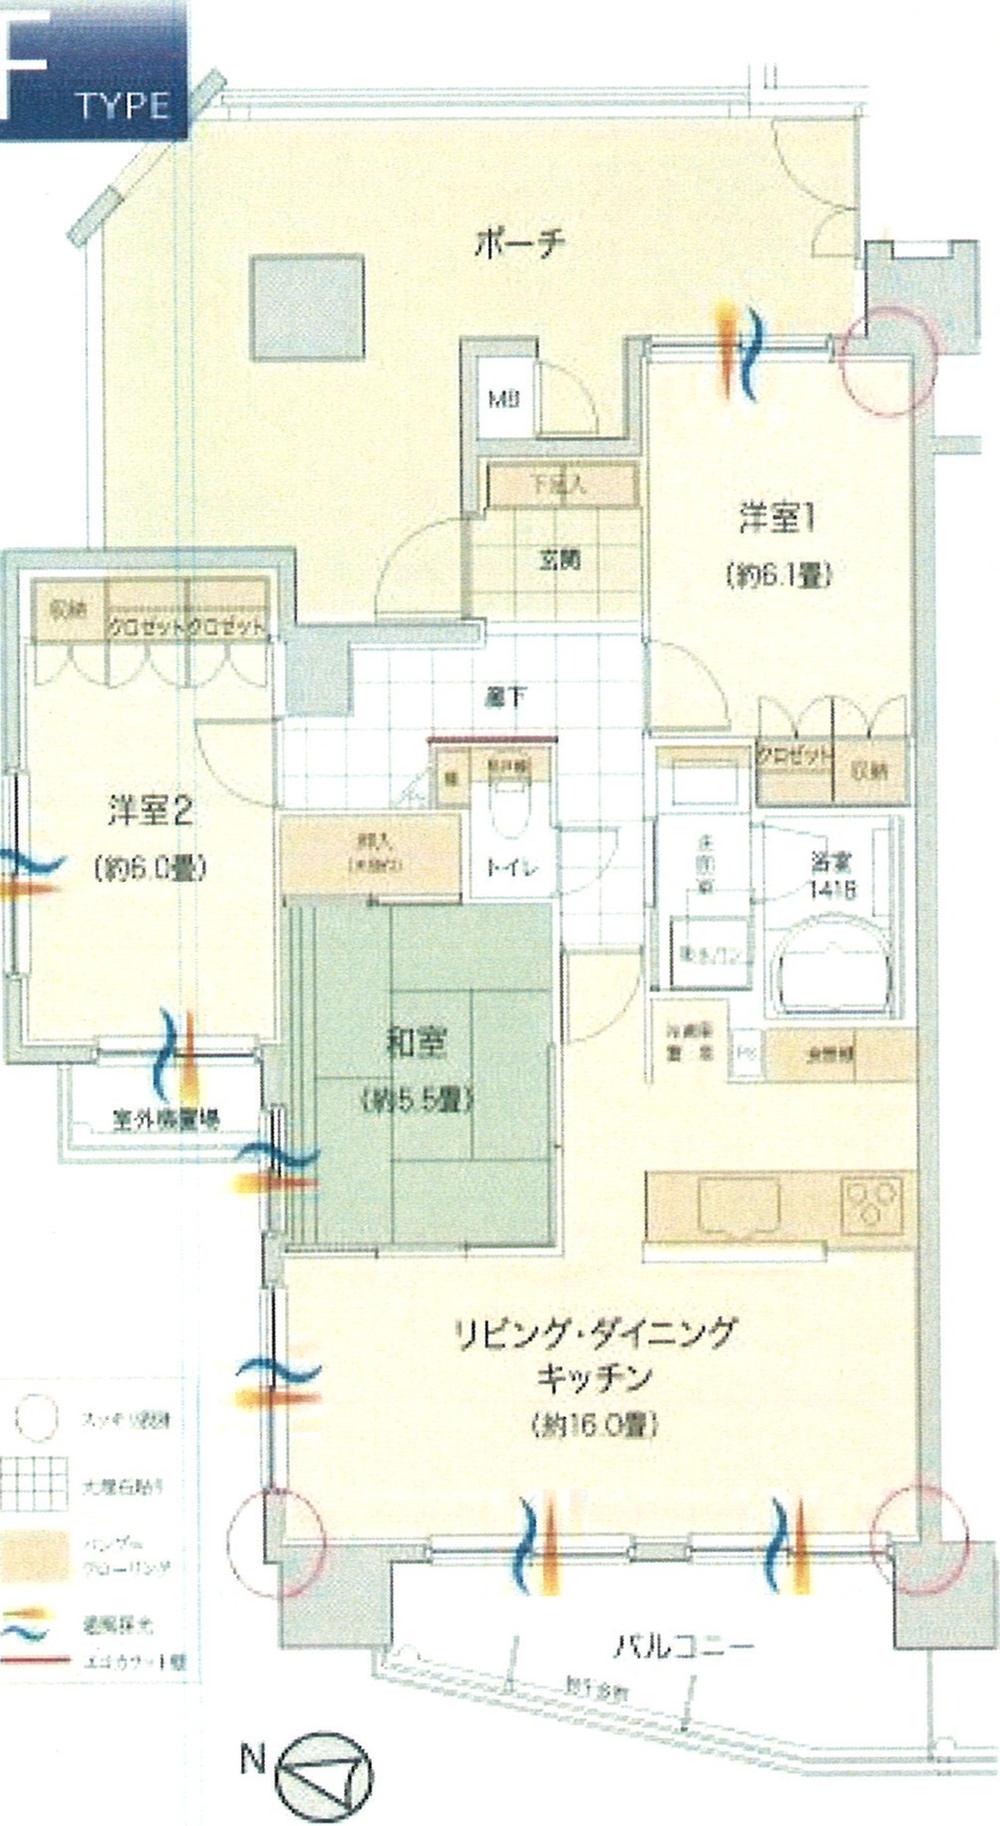 Floor plan. Immediate Available 						 / 							2 along the line more accessible 						 / 							It is close to the city 						 / 							System kitchen 						 / 							Bathroom Dryer 						 / 							Corner dwelling unit 						 / 							LDK15 tatami mats or more 						 / 							2 or more sides balcony 						 / 							Elevator 						 / 							TV monitor interphone 						 / 							Dish washing dryer 						 / 							Delivery Box